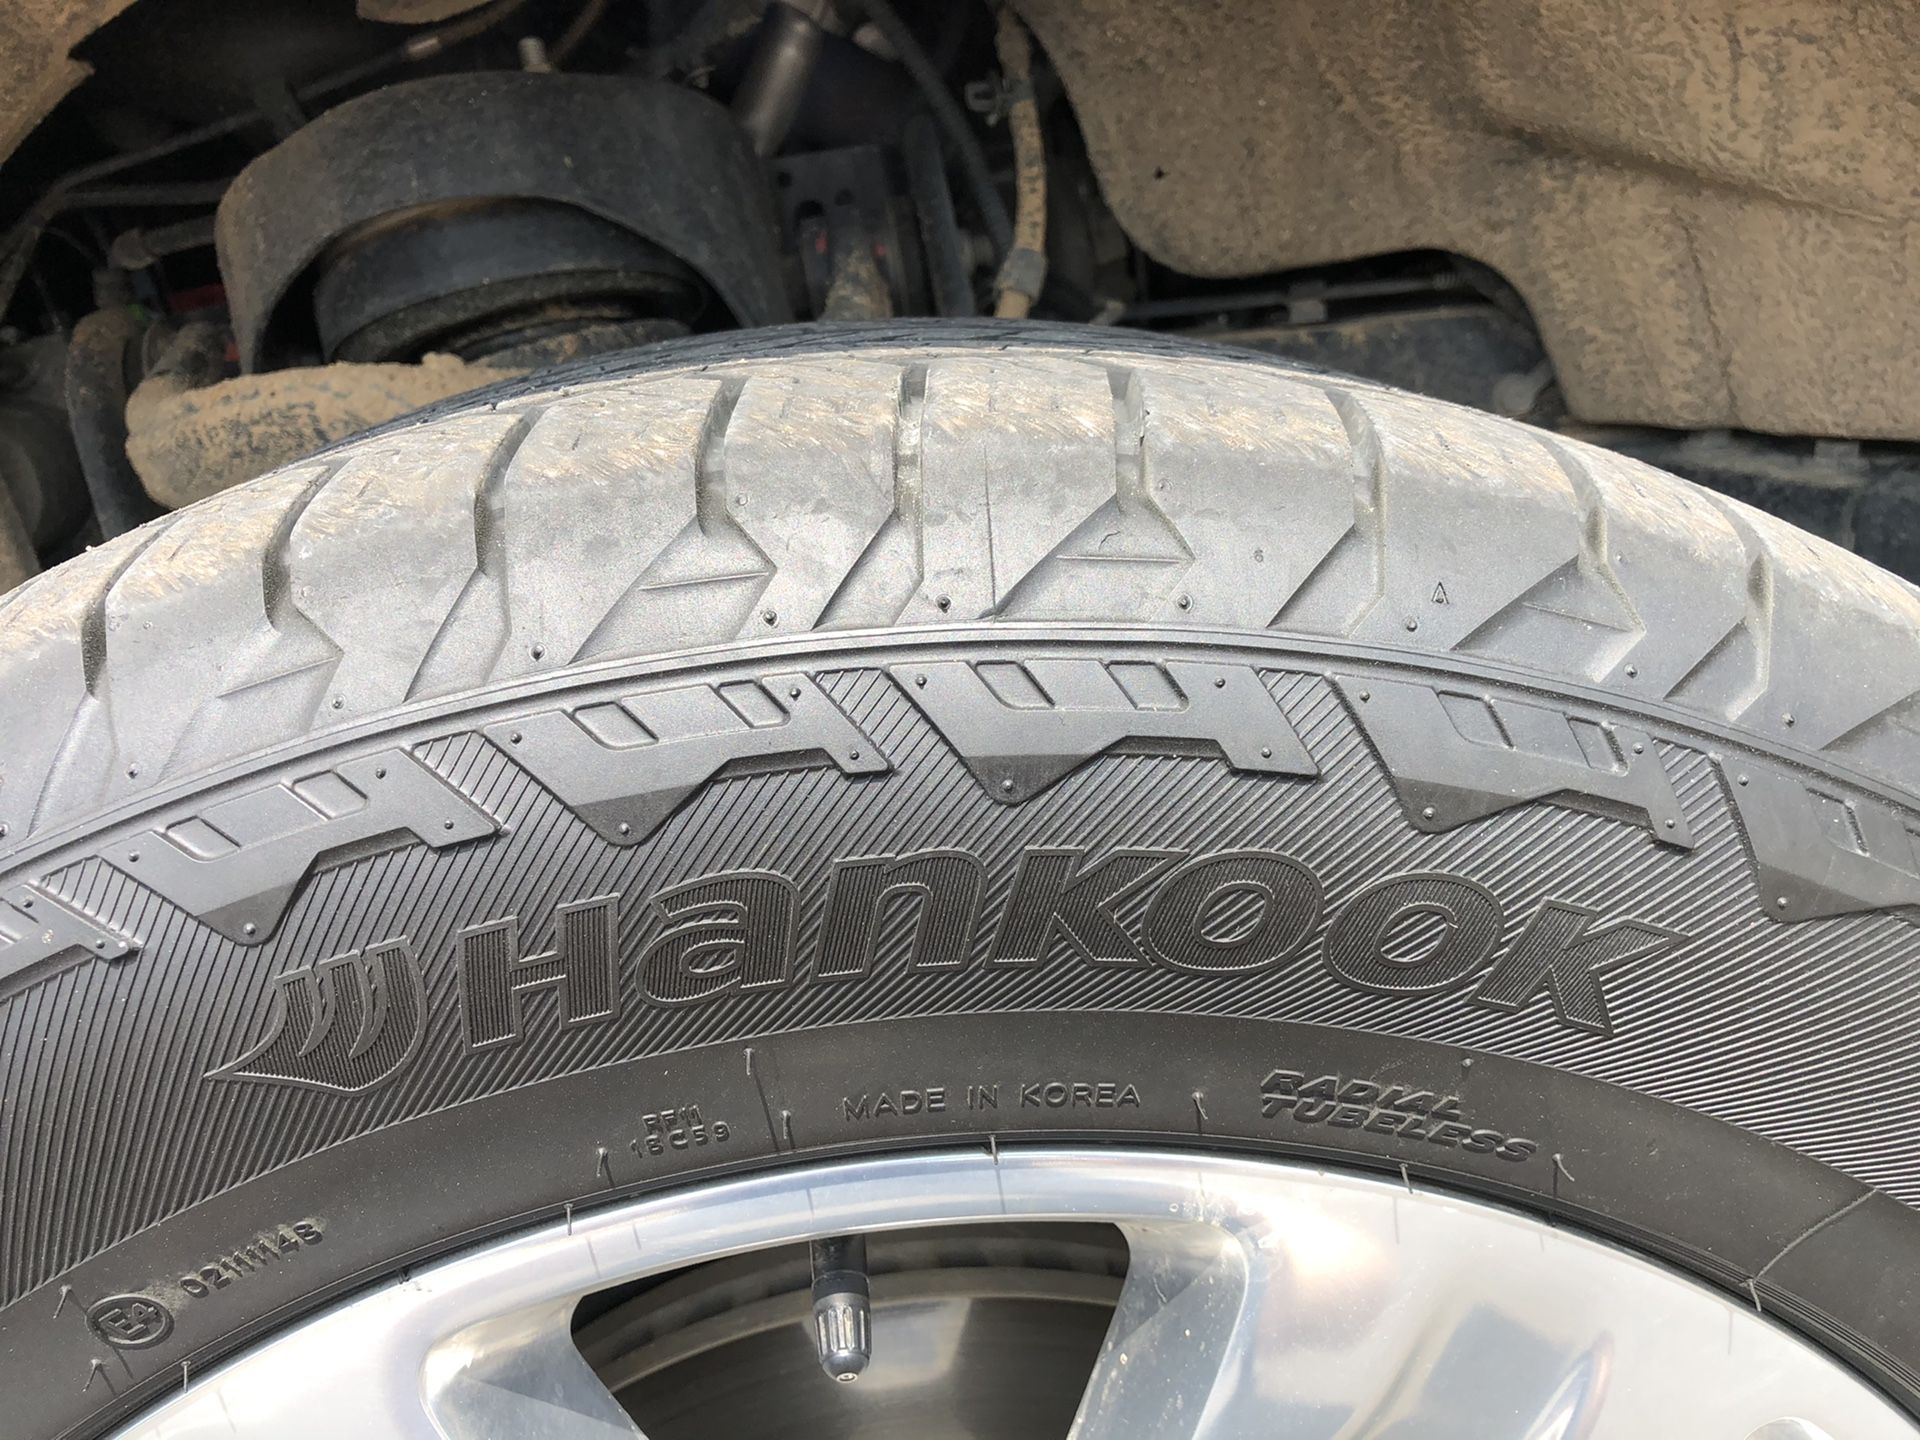 Ford F-150 Hankook Tires for sale (wheels not included)